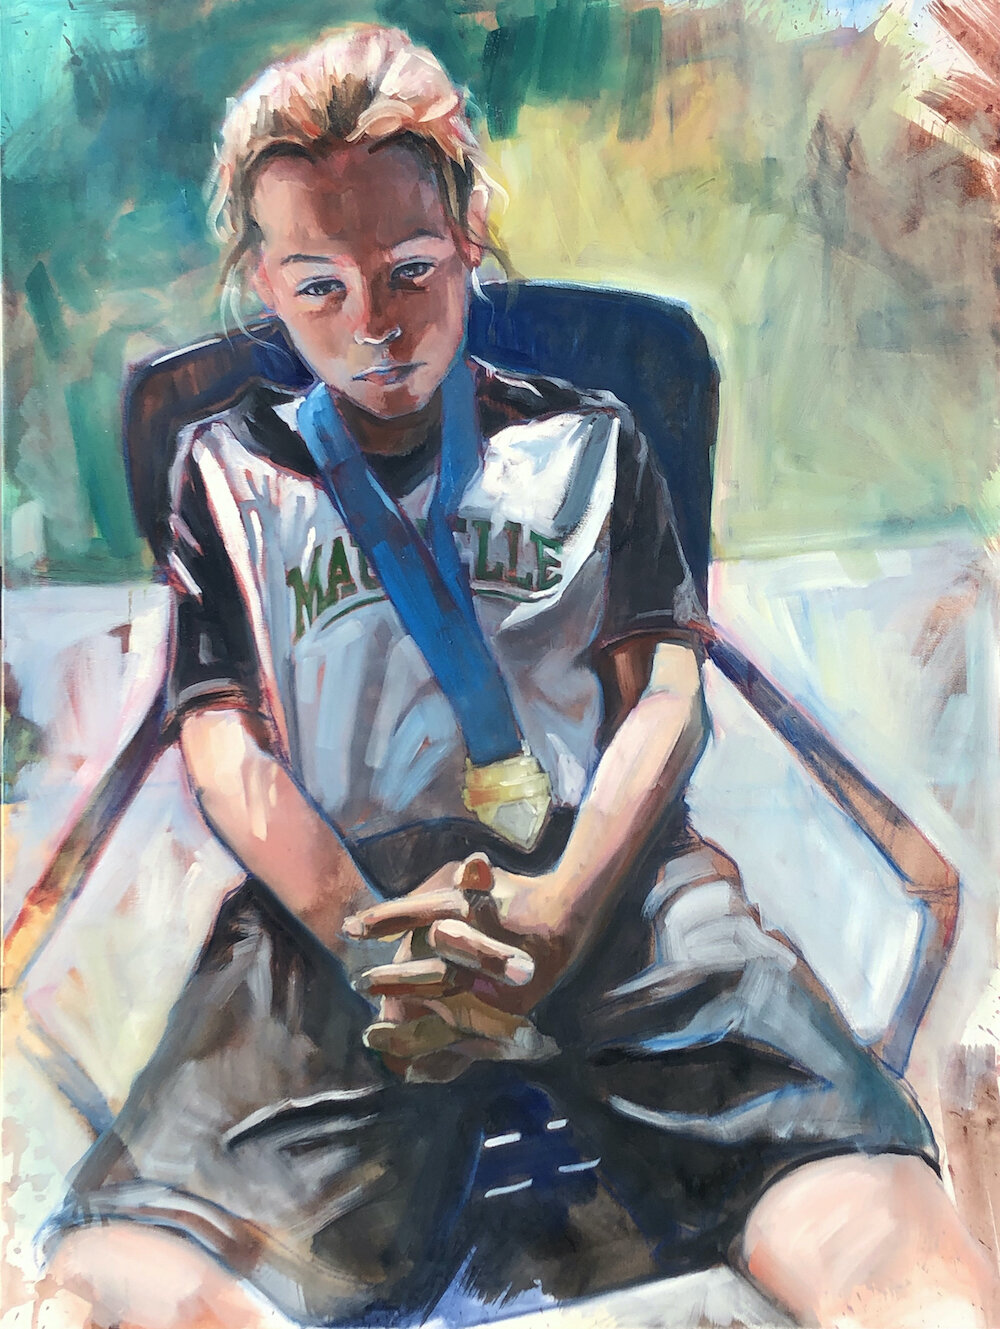    The Midfielder, The State Title, and the Collapse  , 48” x 36”, oil on canvas 